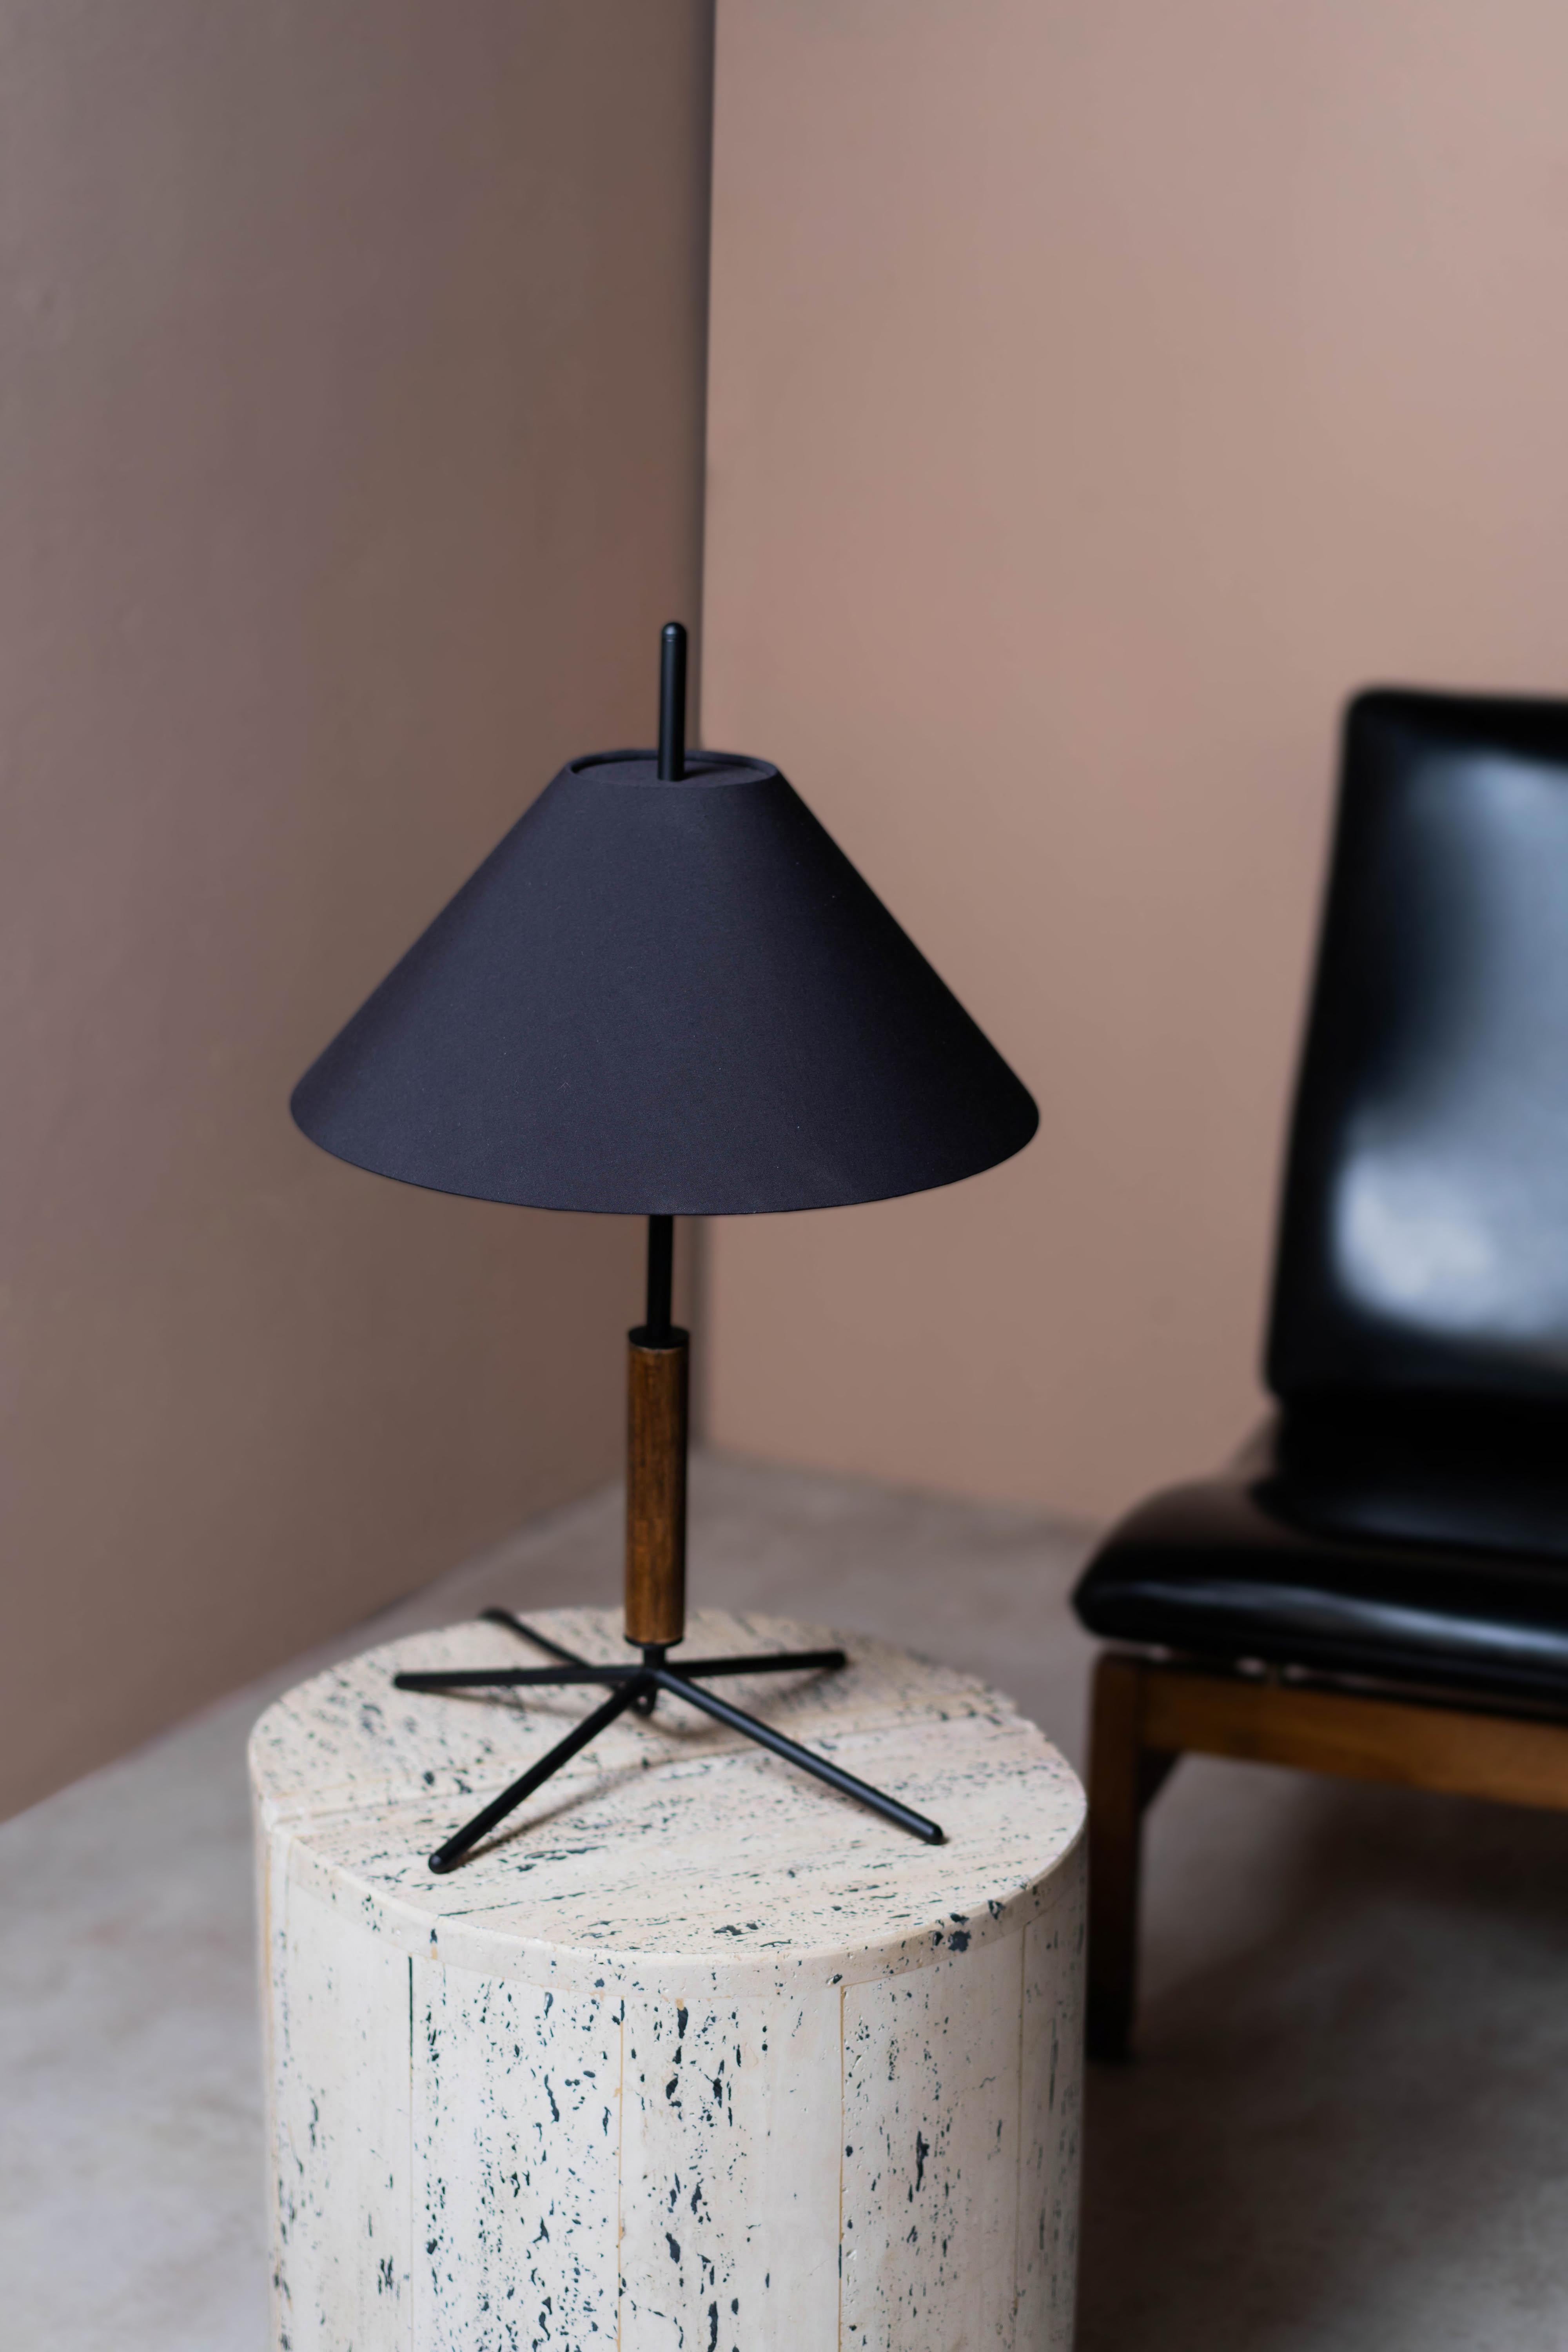 Spanish Contemporary, Handmade Table Lamp, Black, Fabric, Wood, by Mediterranean Objects For Sale